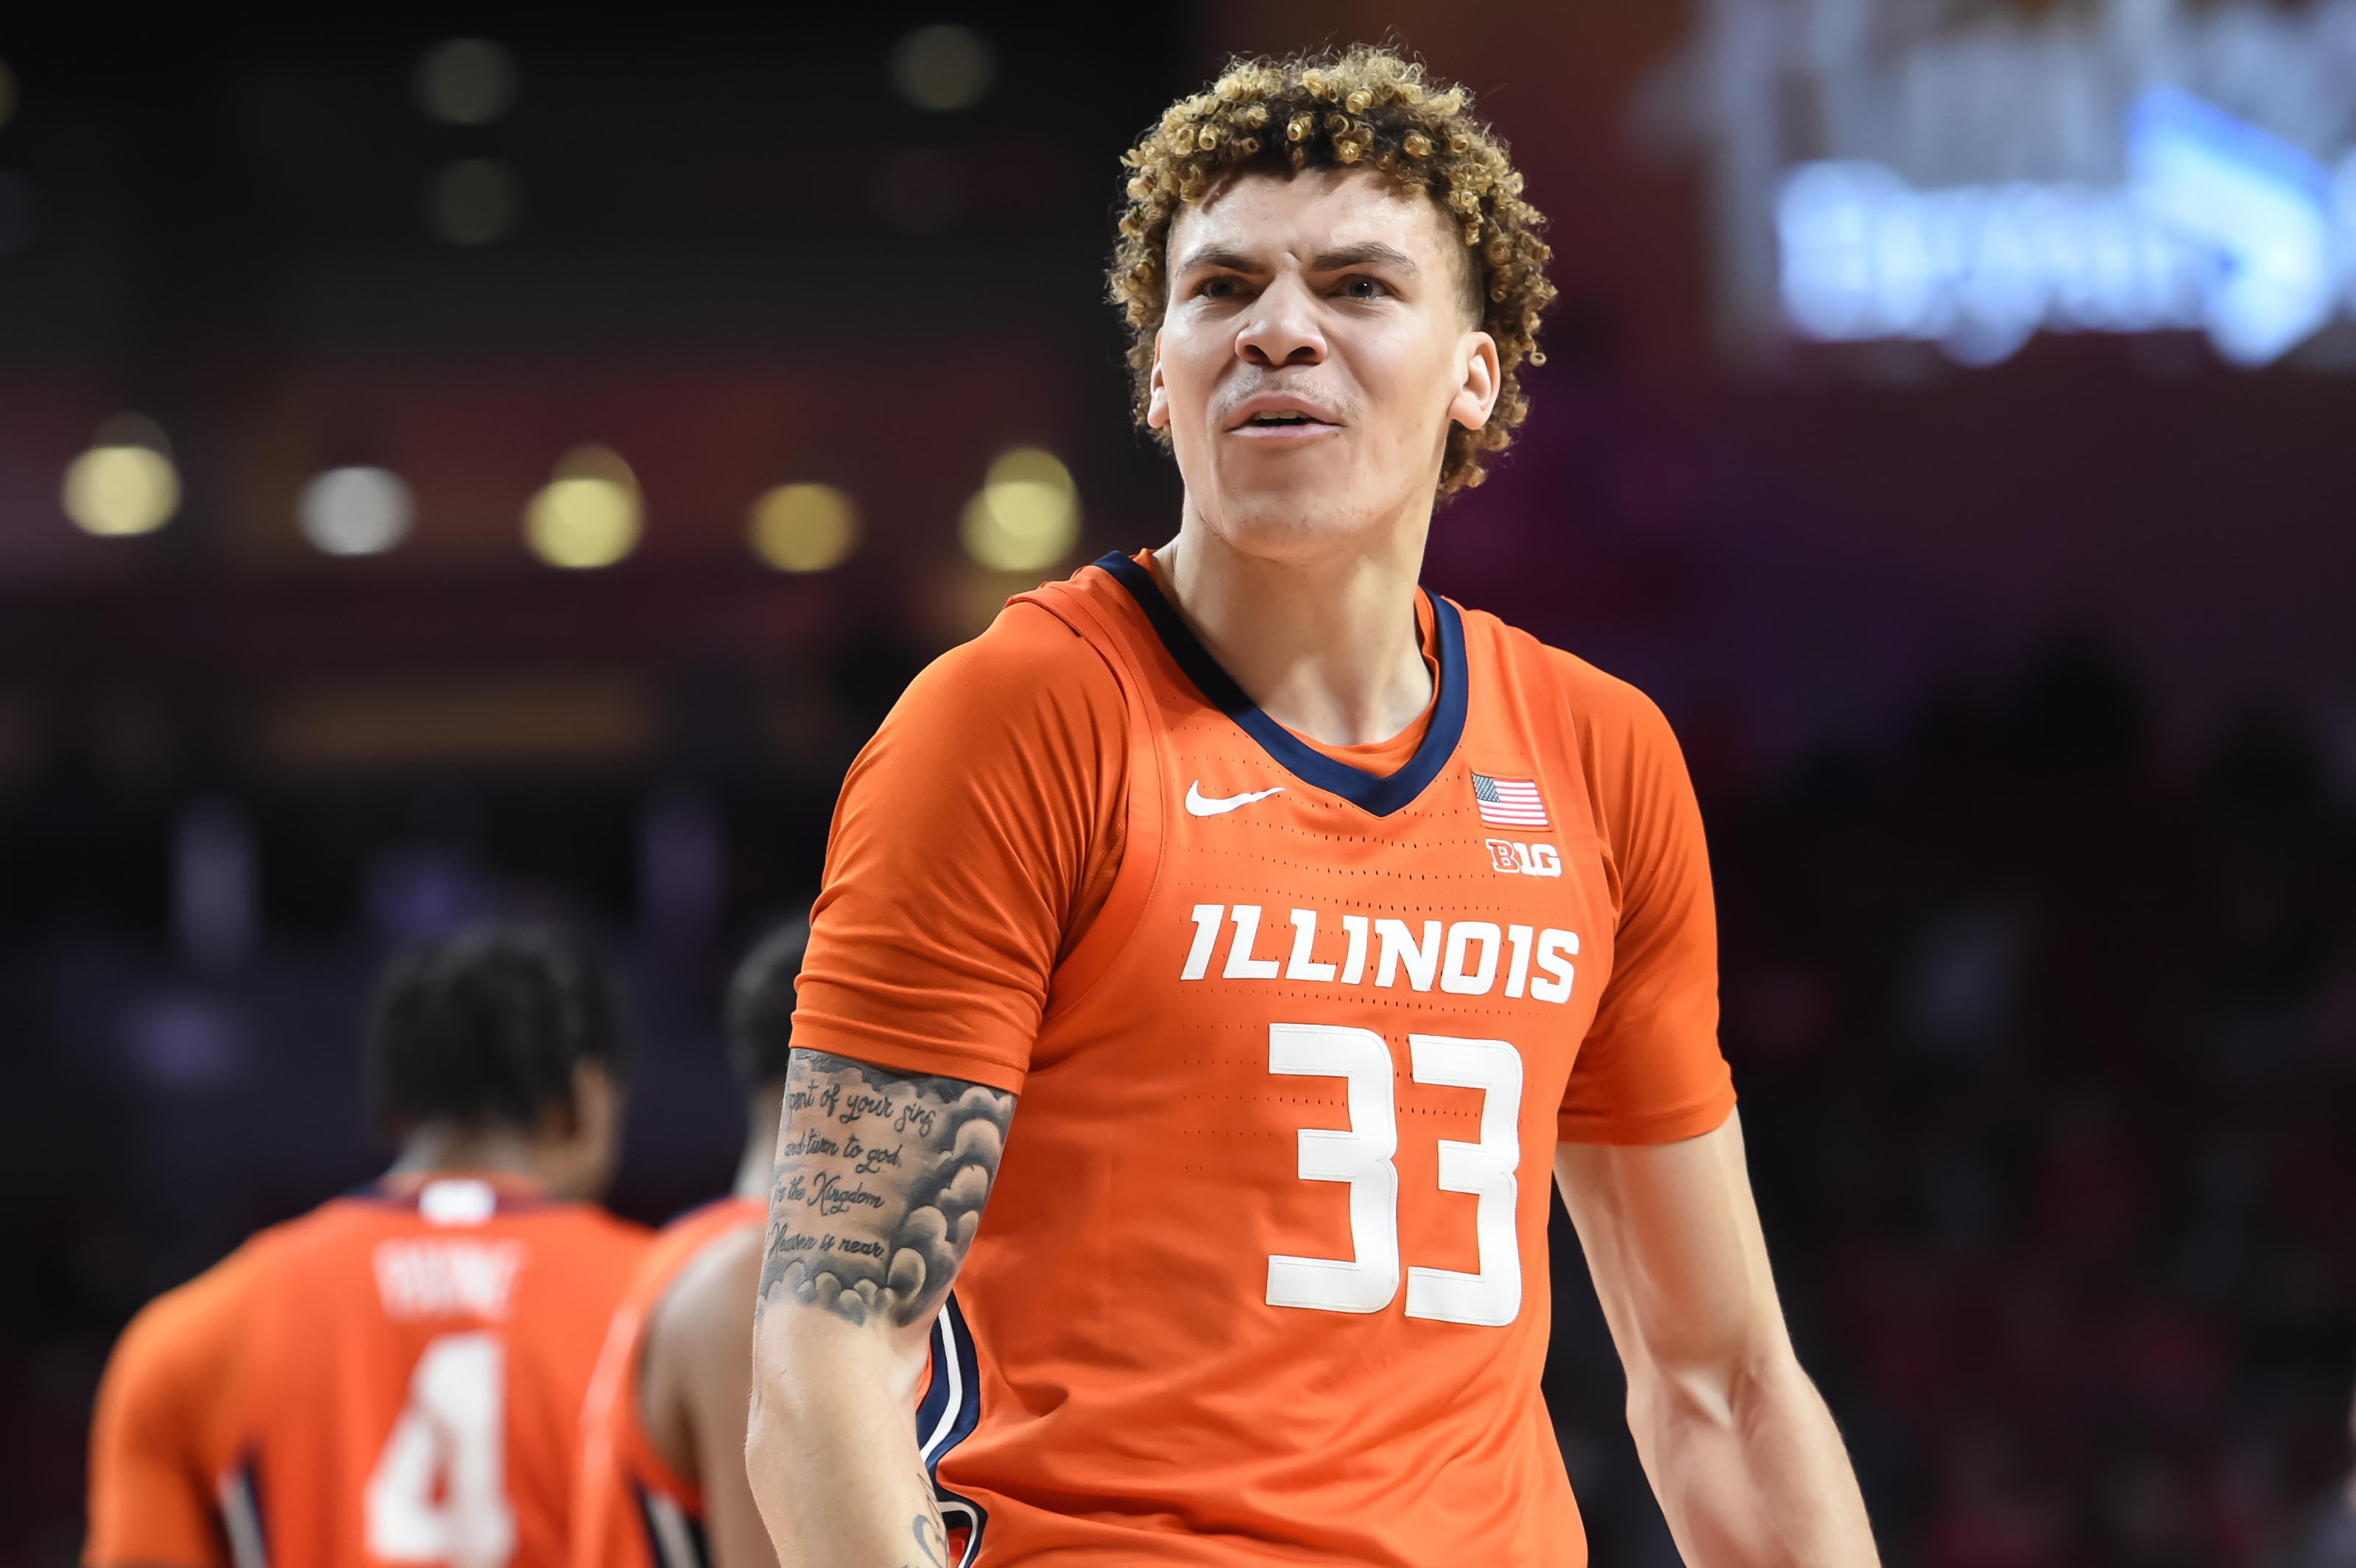 CBS Sports ranks Top 25 players ahead of 2022-23 college